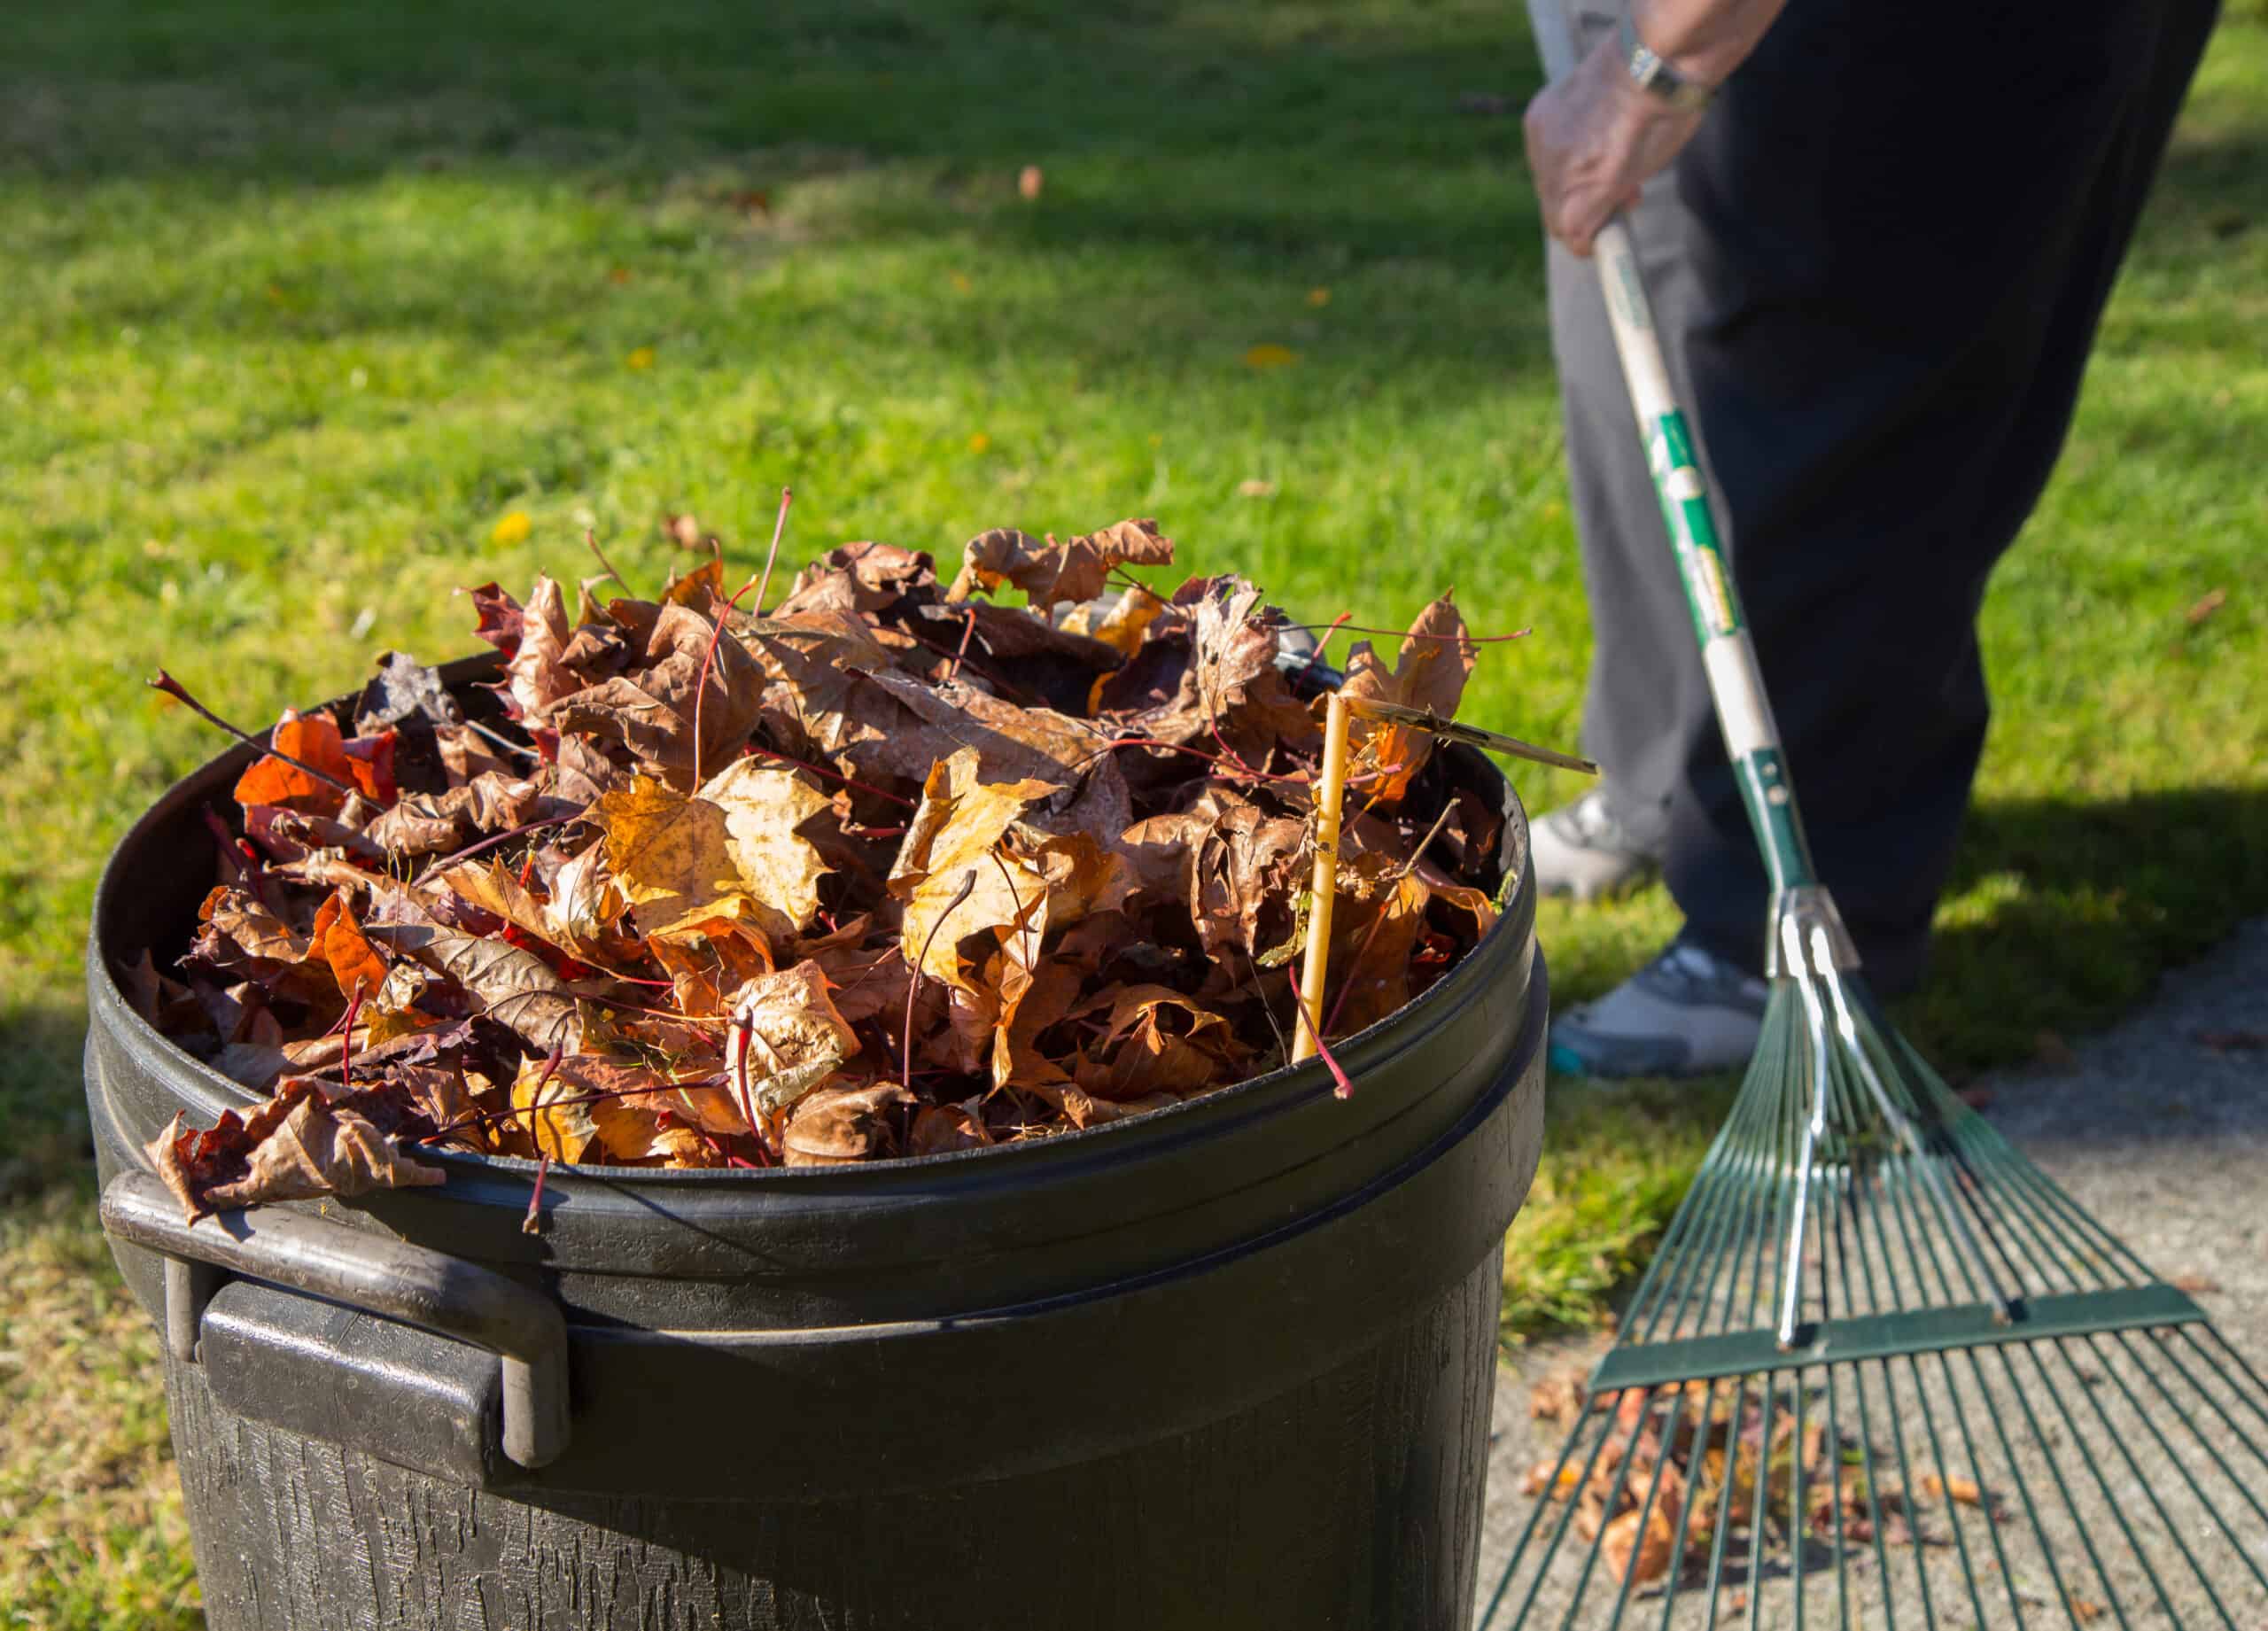 Schedule lawn cleanup and leaf removal services in Pennsylvania to create a clean and comfortable outdoor living space